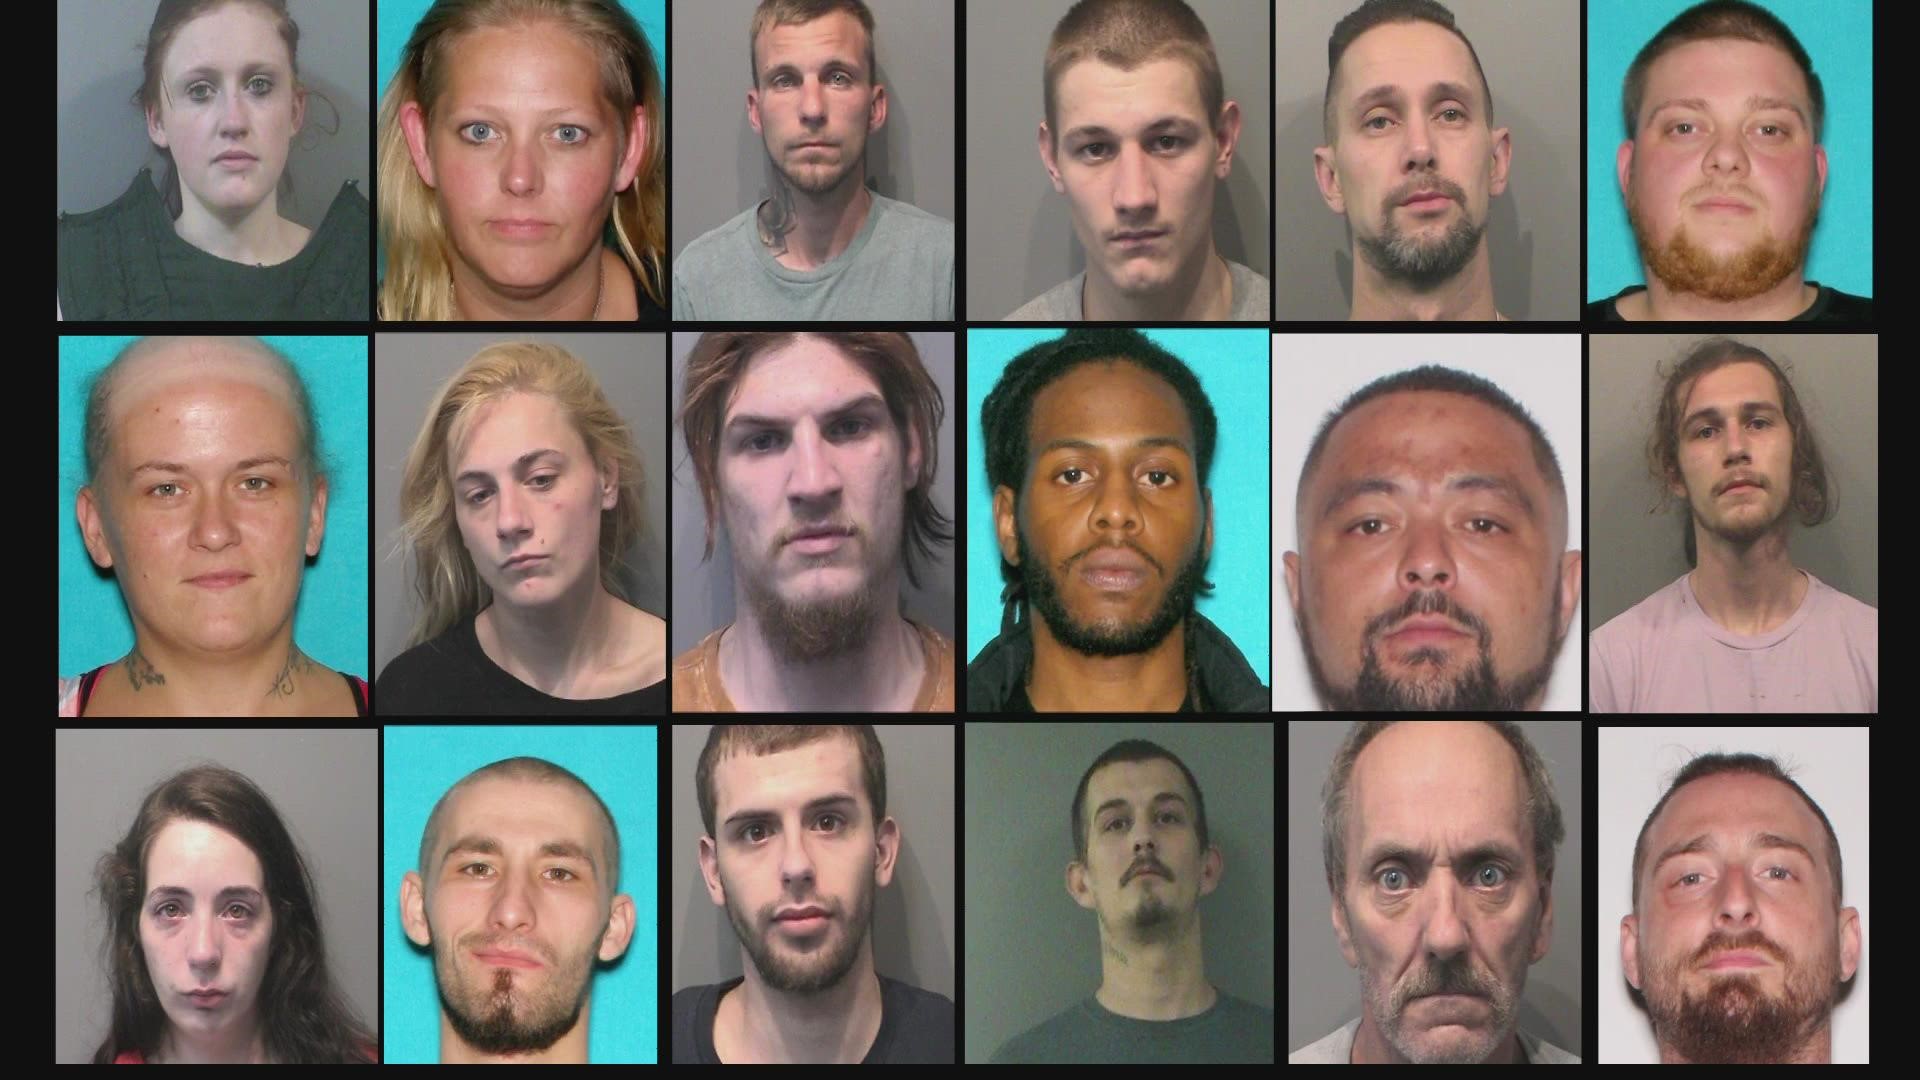 Police across Johnson County arrested 32 people in a drug sweep. Now they need help finding 18 other suspects.